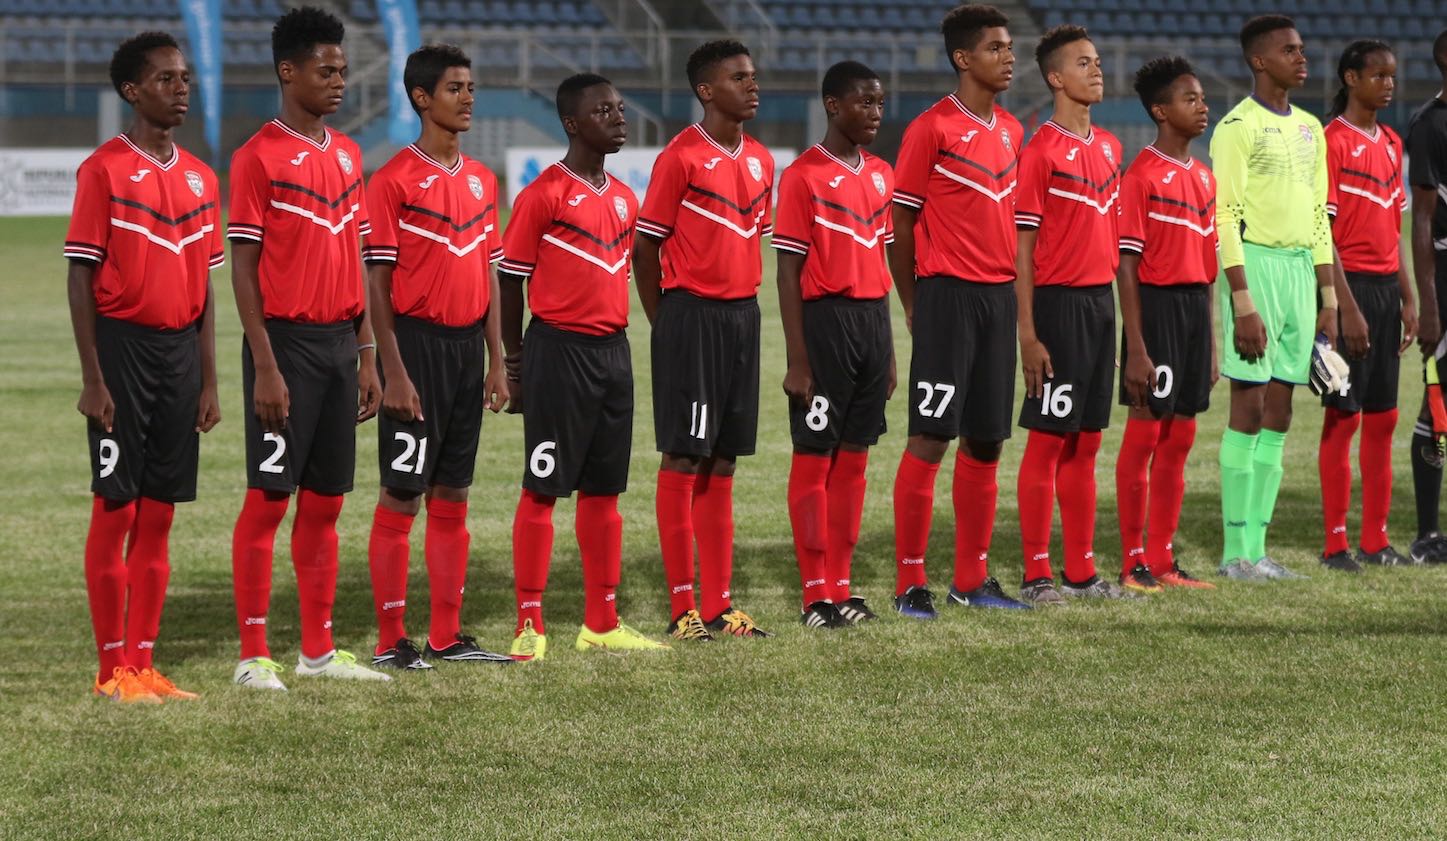 U-15 team to face Man City, DC United, Houston Dynamo among other top friendlies as preparations continues